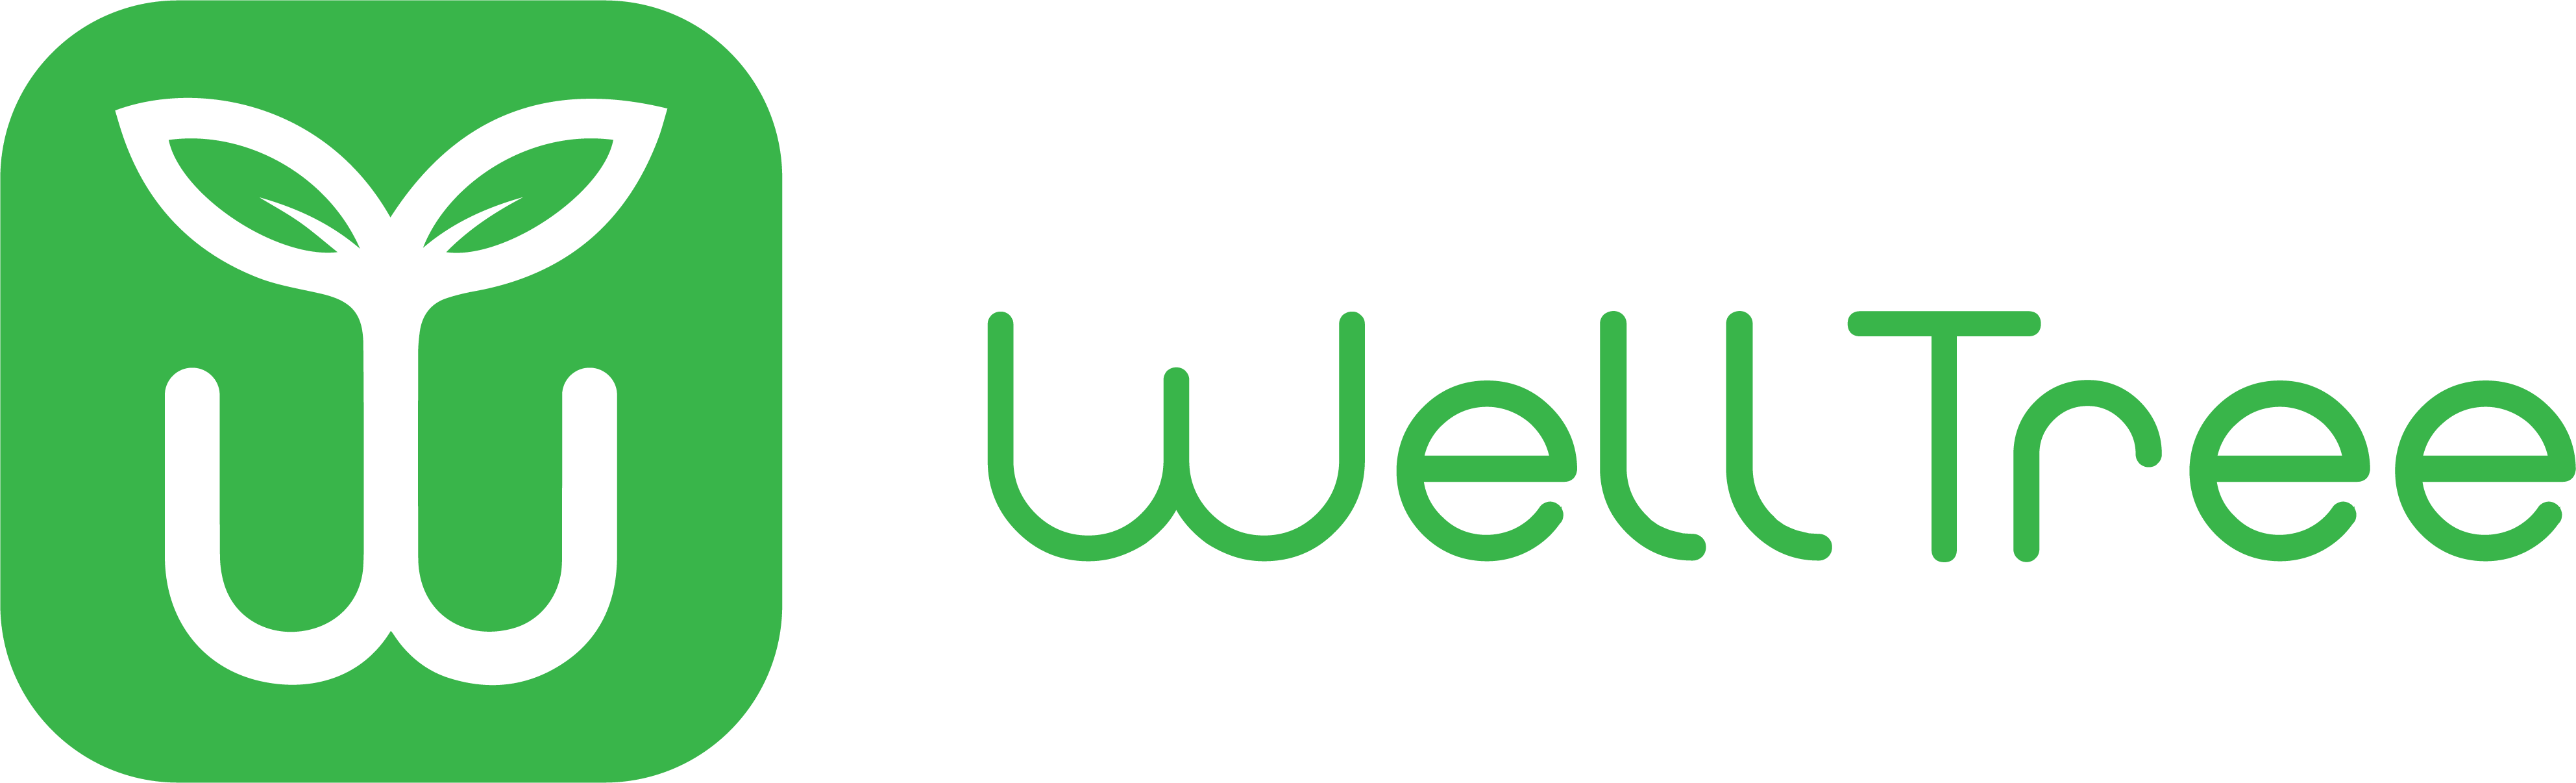 Welltree , Your Social Network For Health And Wellness - Wordbee Logo (3969x1206)